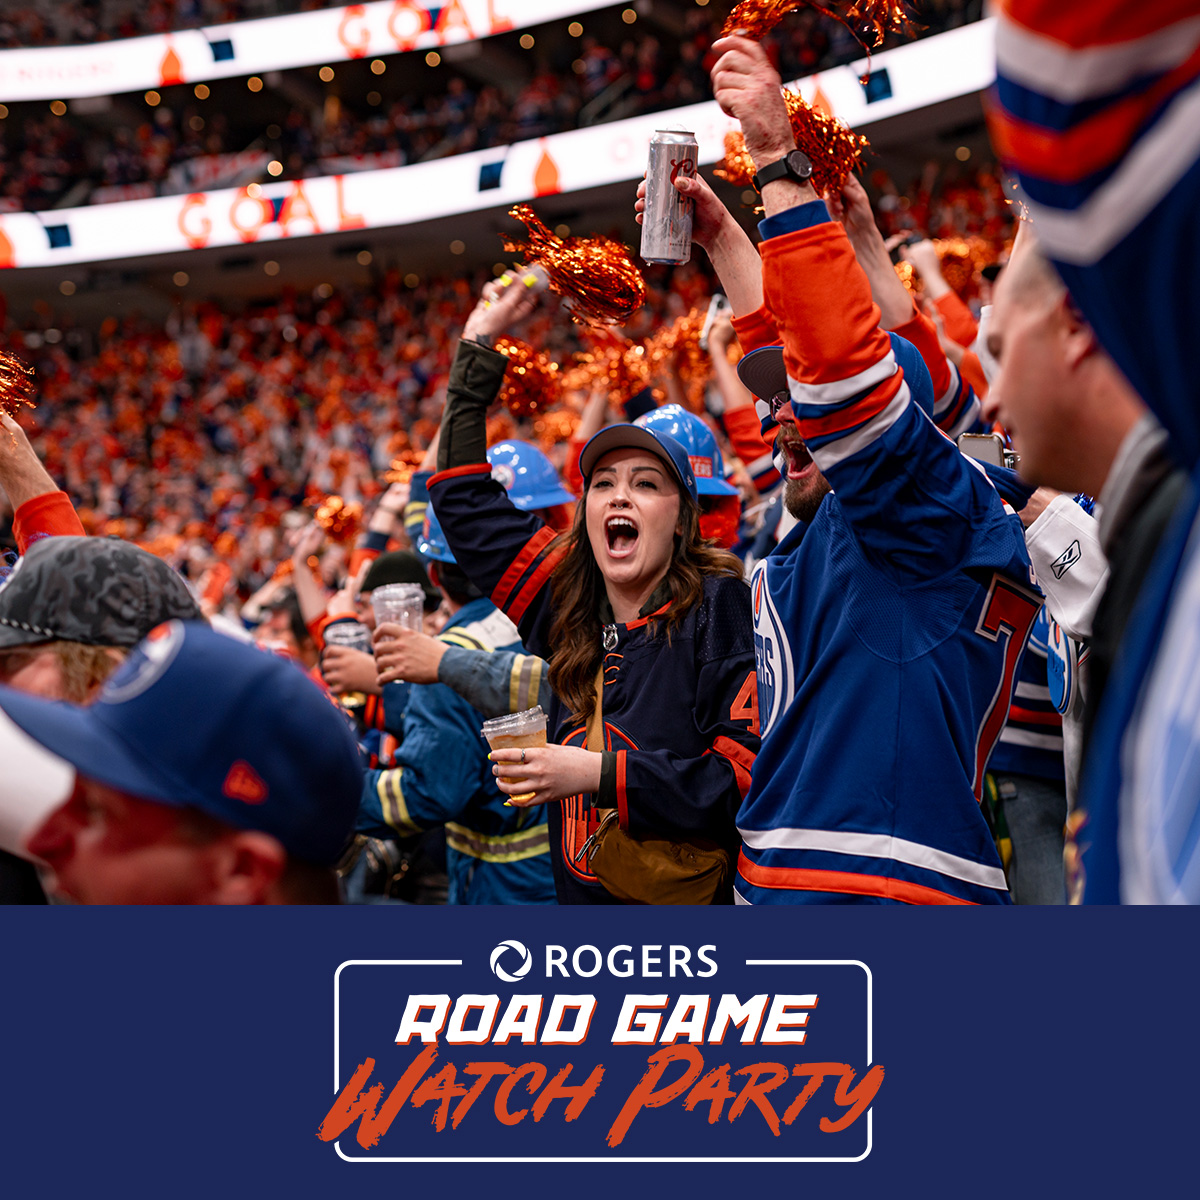 🧡💙 The @Rogers Road Game Watch Party returns TONIGHT at #RogersPlace for Game 5️⃣ of the @EdmontonOilers series against the Vancouver Canucks!!⁠ ⁠ Doors: 7 PM⁠ Puck Drop: 8 PM⁠ ⁠ Limited tickets remain, get yours now!! 🎫: RogersPlace.com/WatchParty